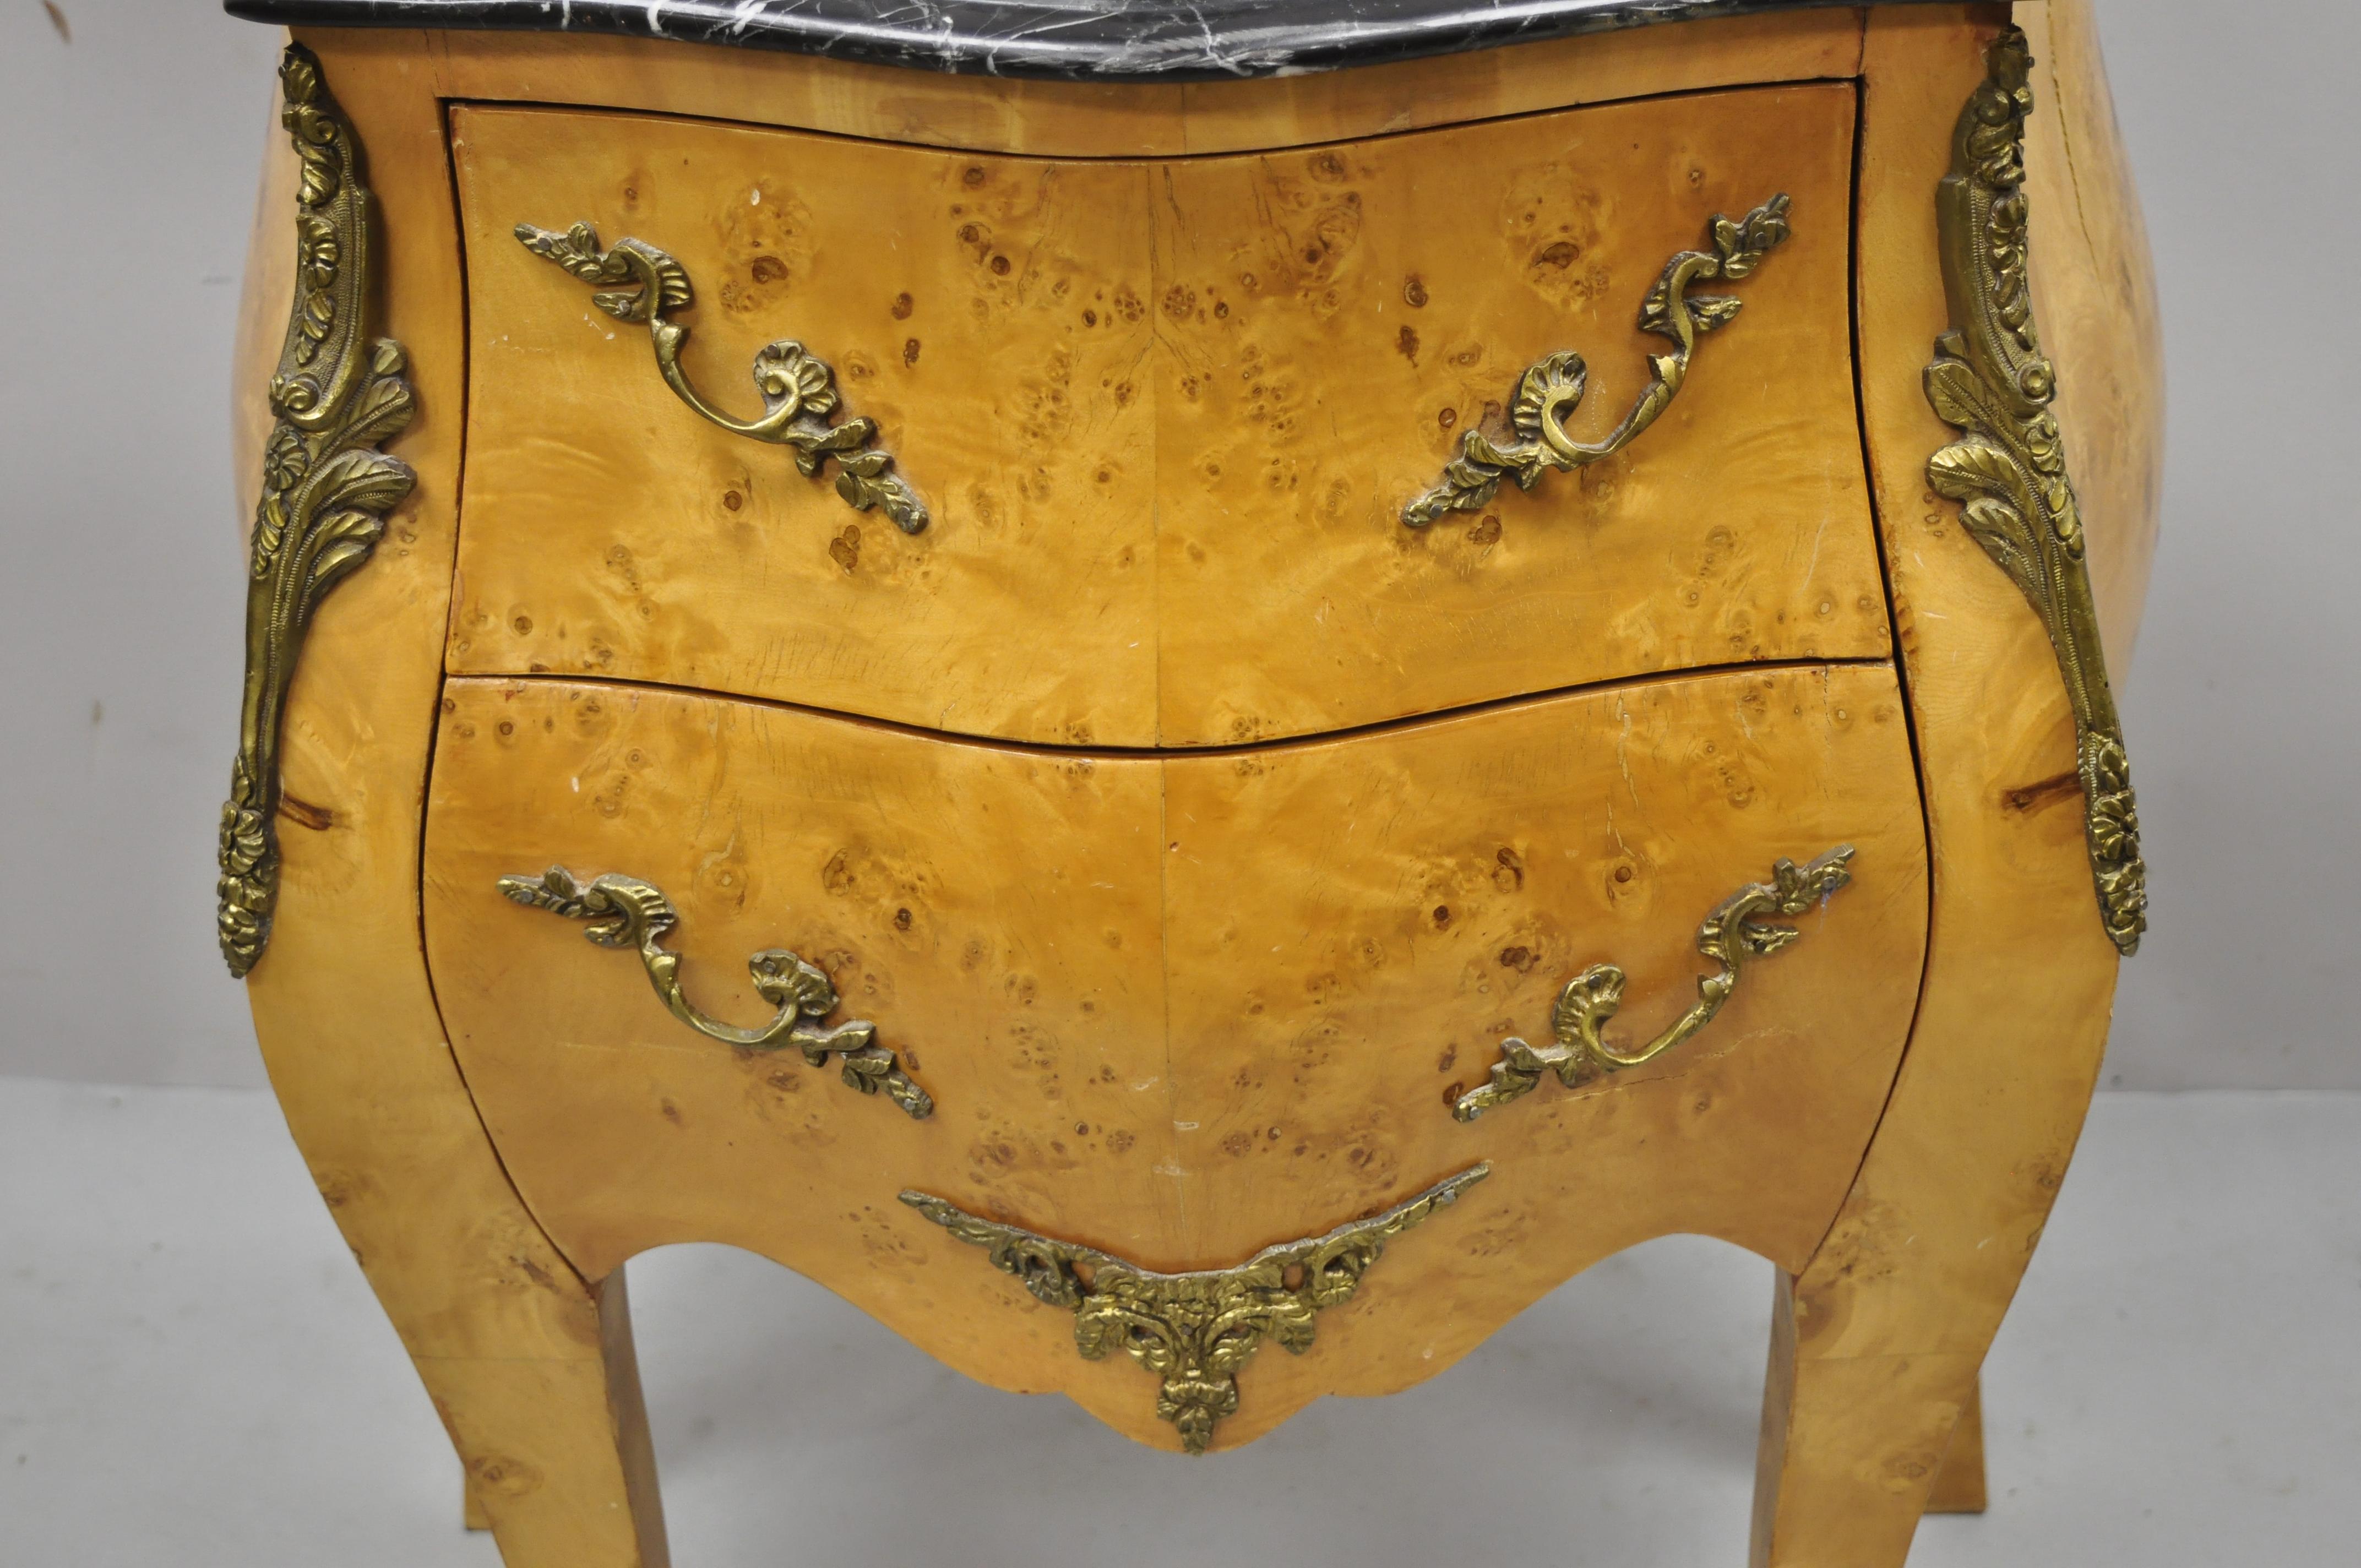 Reproduction French Louis XV style marble top burlwood small bombe commode nightstand chest. Item features shapely marble top, bronze ormolu, beautiful wood grain, 2 drawers, great style and form. Circa Late 20th Century. Measurements: 30.5